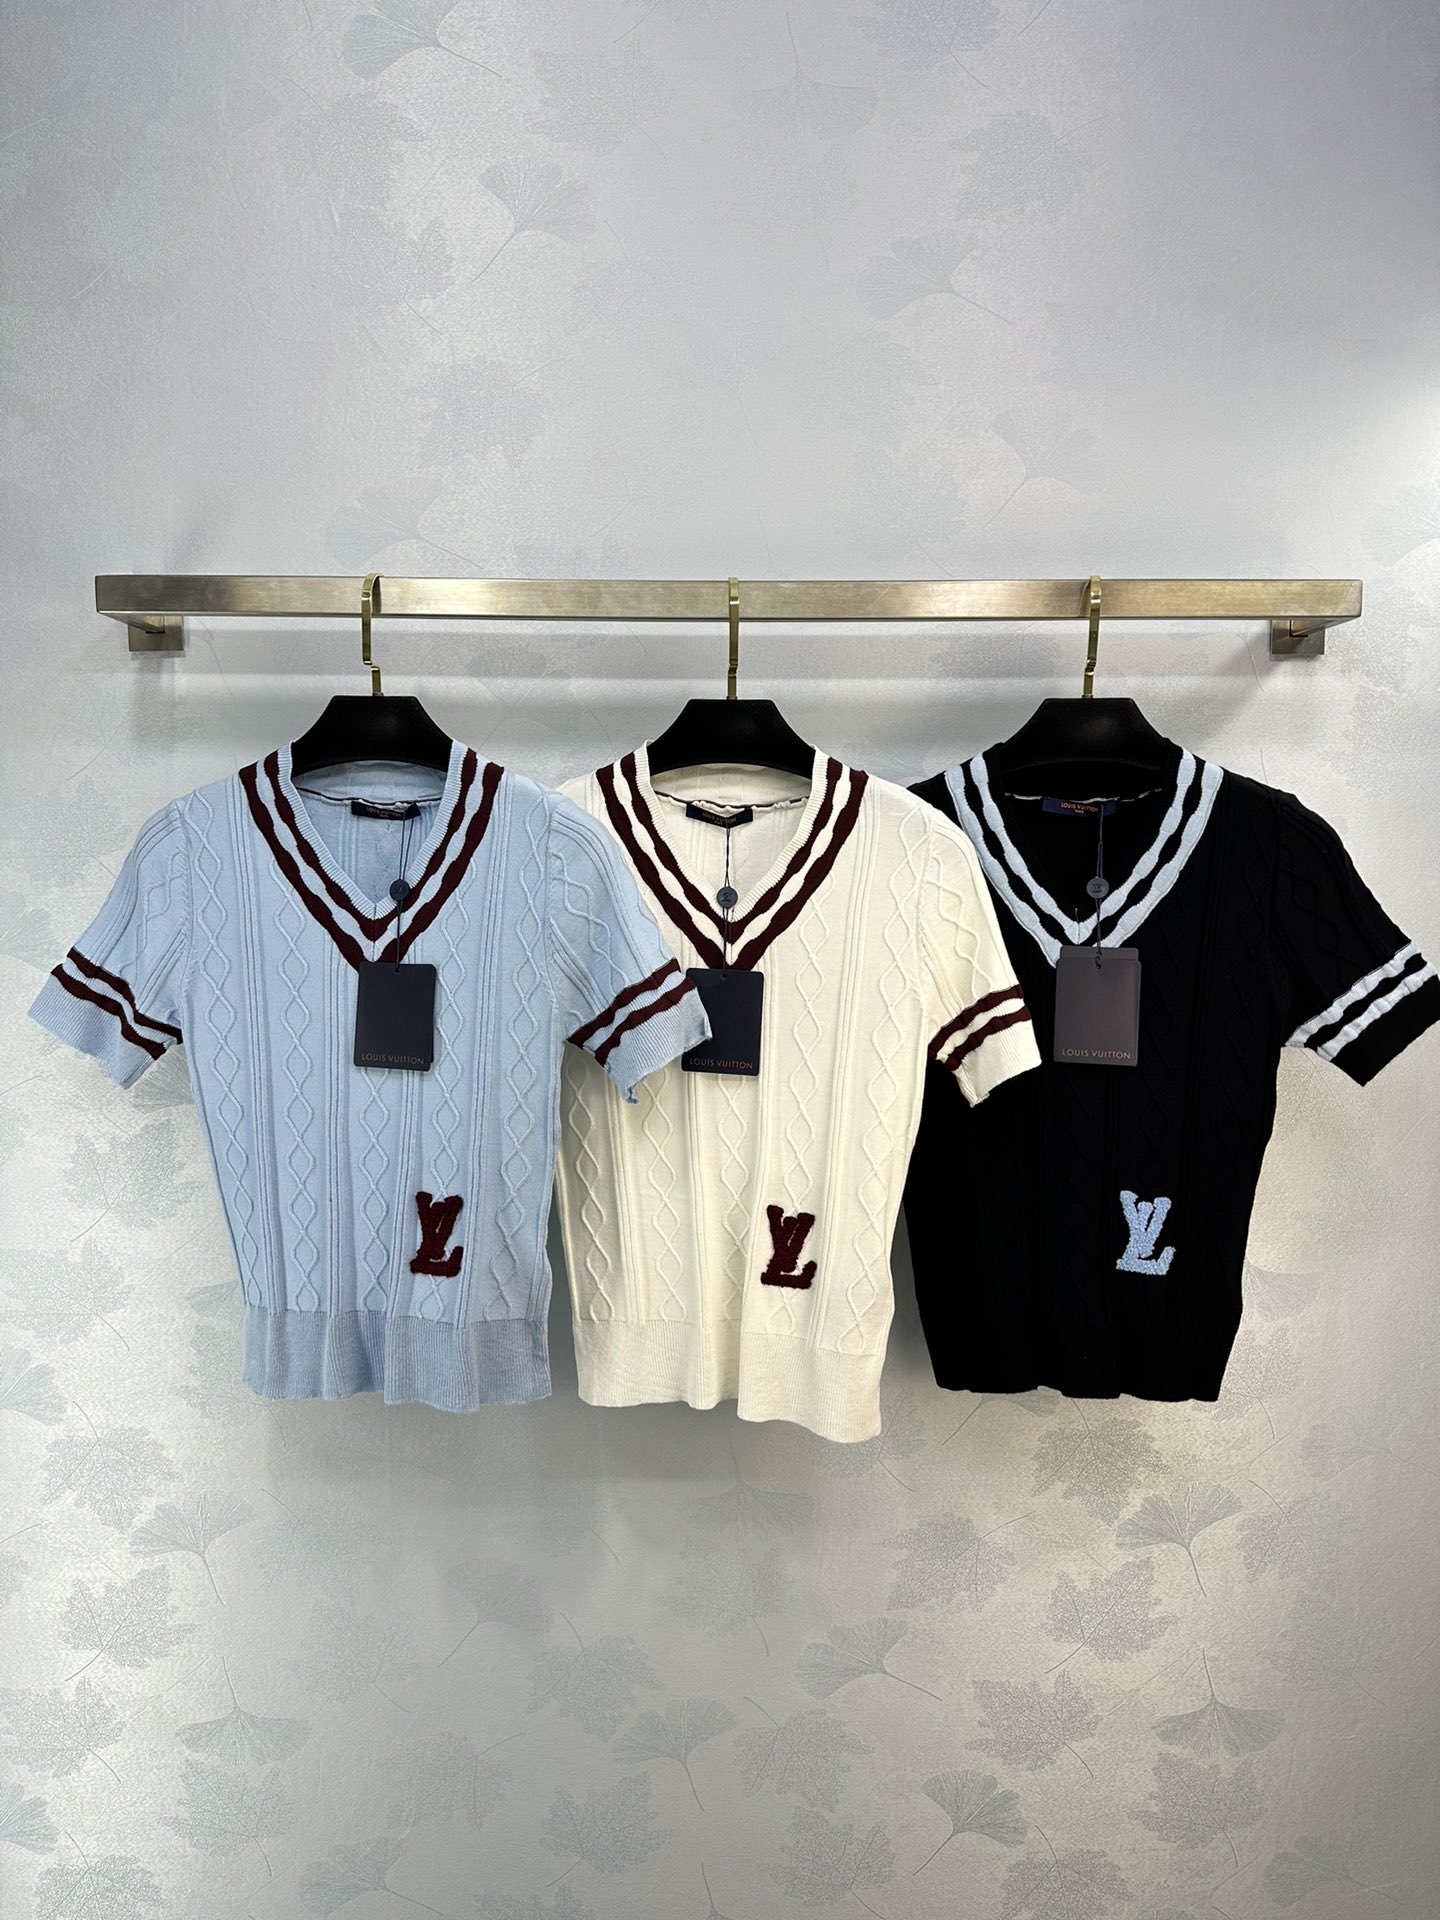 Louis Vuitton Clothing T-Shirt Splicing Knitting Weave Spring/Summer Collection Short Sleeve